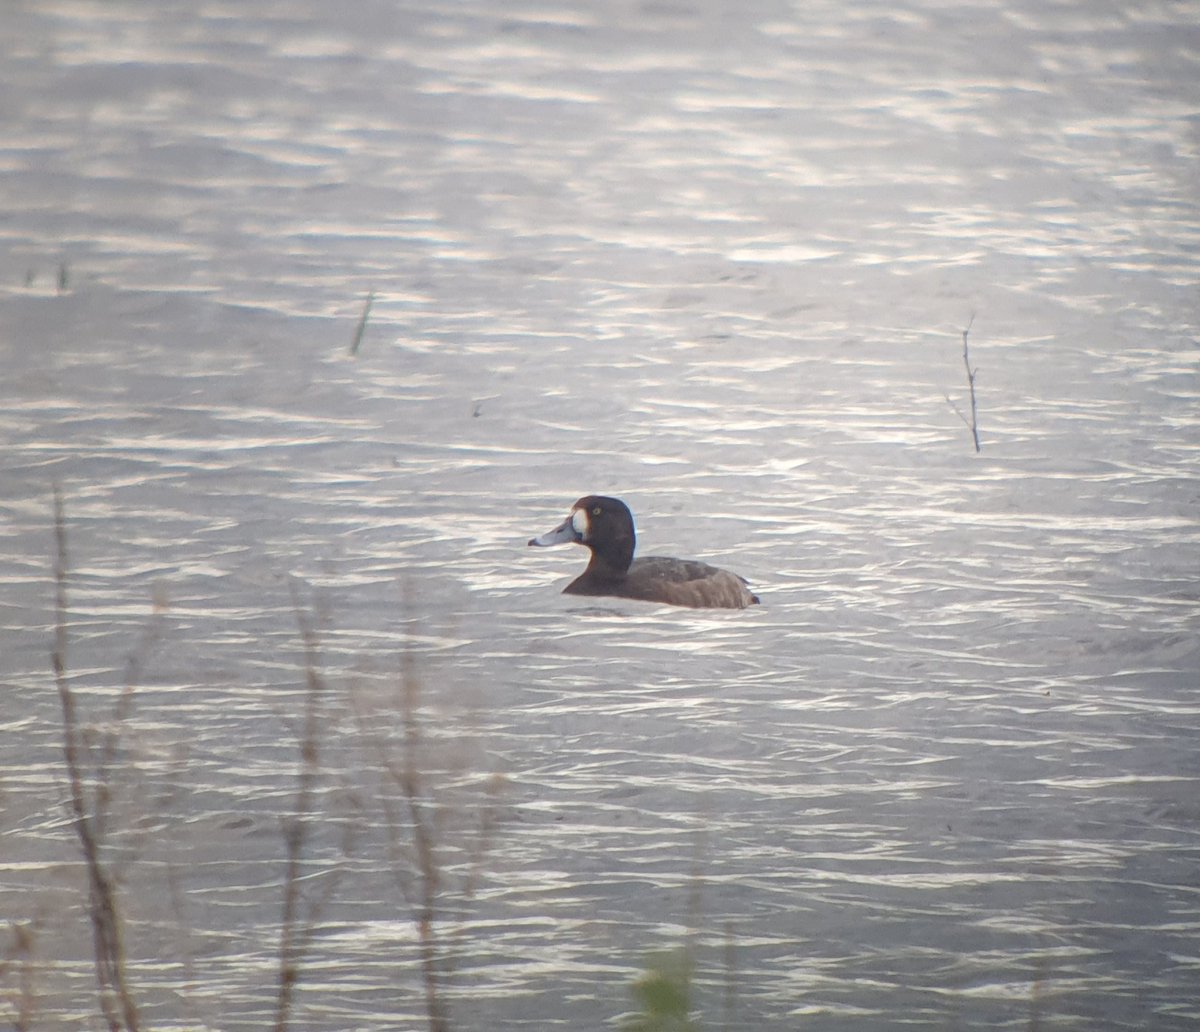 Good days birding. After a slow start with just the Scaup flock at North Duffield, hirundine passage picked up in pm and a call from @LDV_NNR resulted in 3rd!!! garden Osprey of the spring, and peaked this evening finding sum plum Slav Grebe at Bank Island